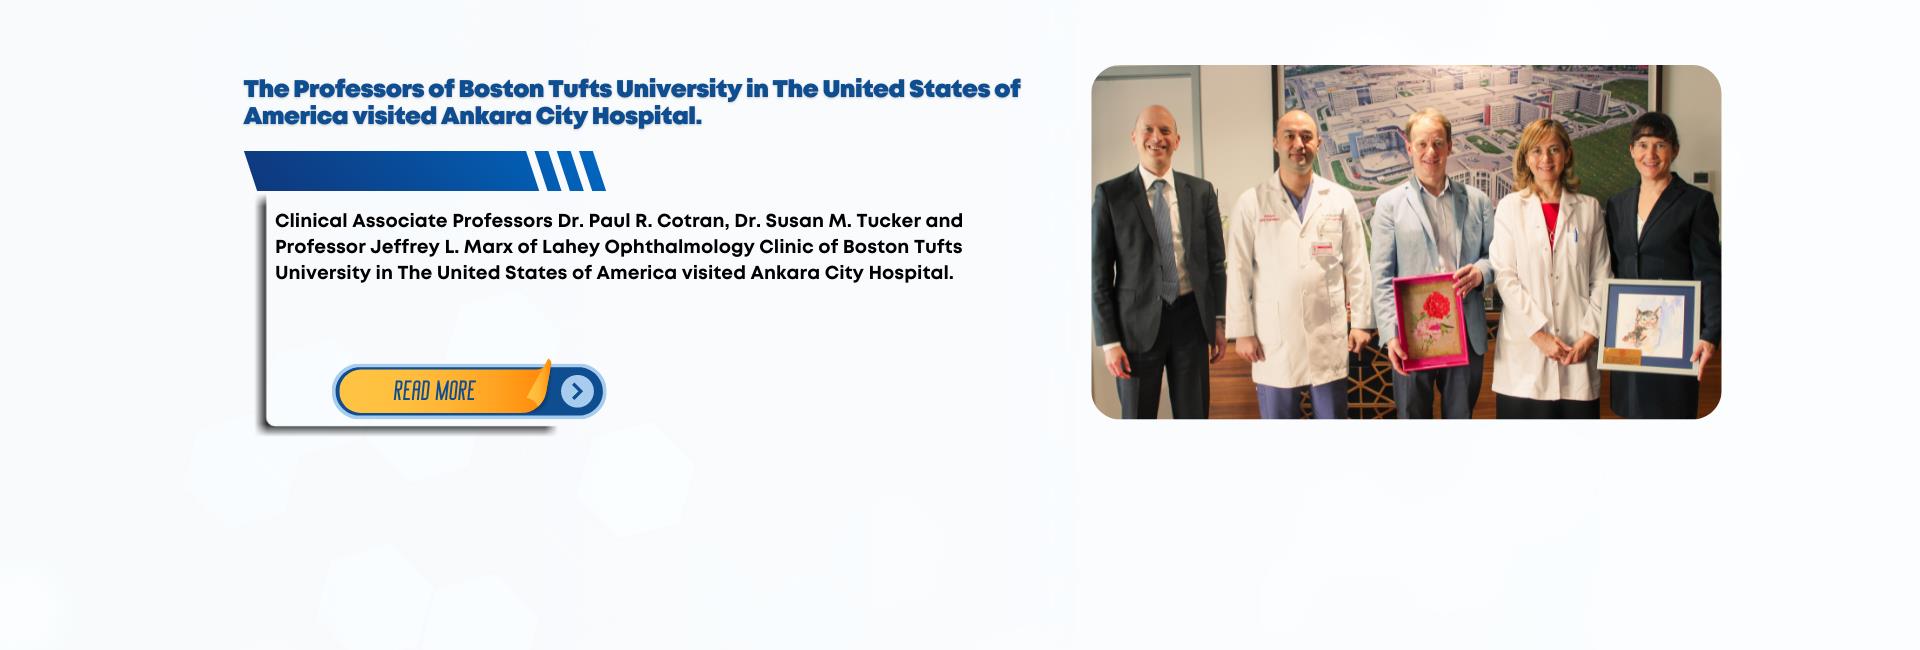 The Professors of Boston Tufts University in The United States of America visited Ankara City Hospital.